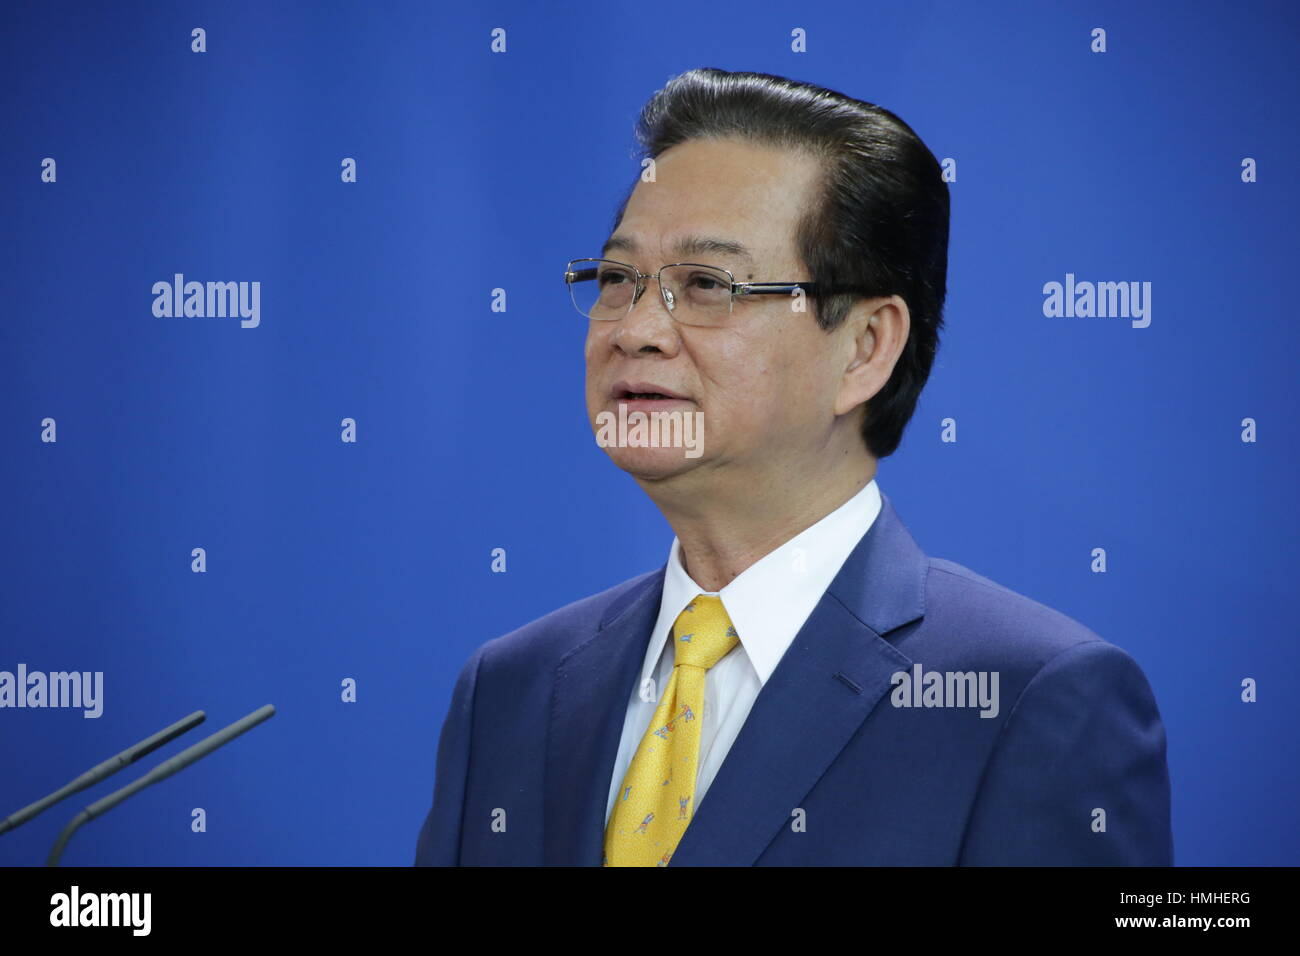 Berlin, Germany, October 15th, 2014: Vietnamese Prime Minister Nguyen Tan Dung for official visit to German Chancellor Angela Merkel. Stock Photo